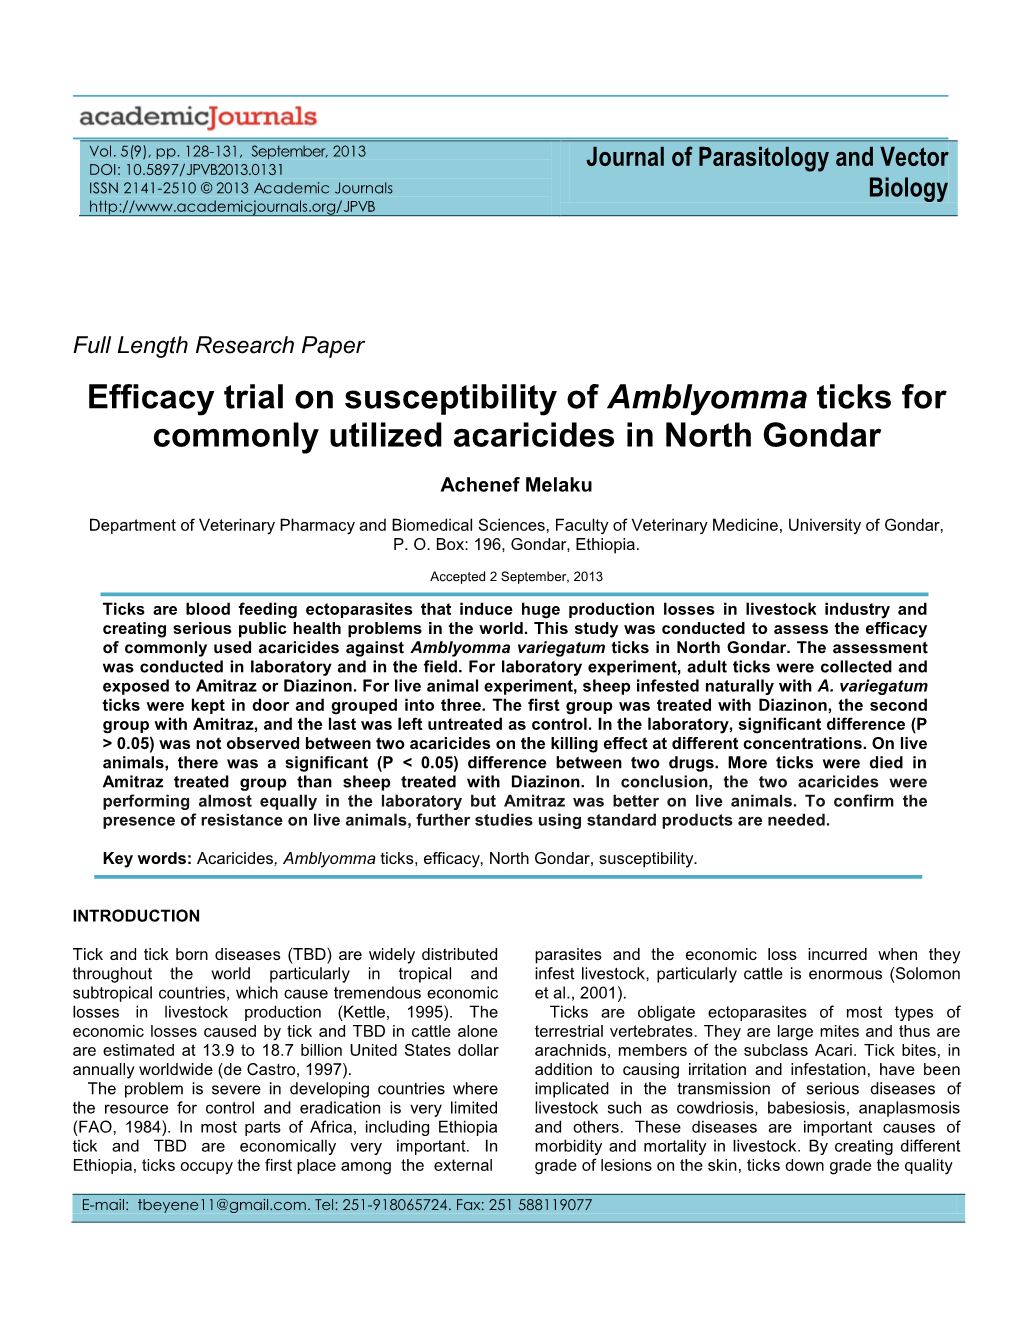 Efficacy Trial on Susceptibility of Amblyomma Ticks for Commonly Utilized Acaricides in North Gondar